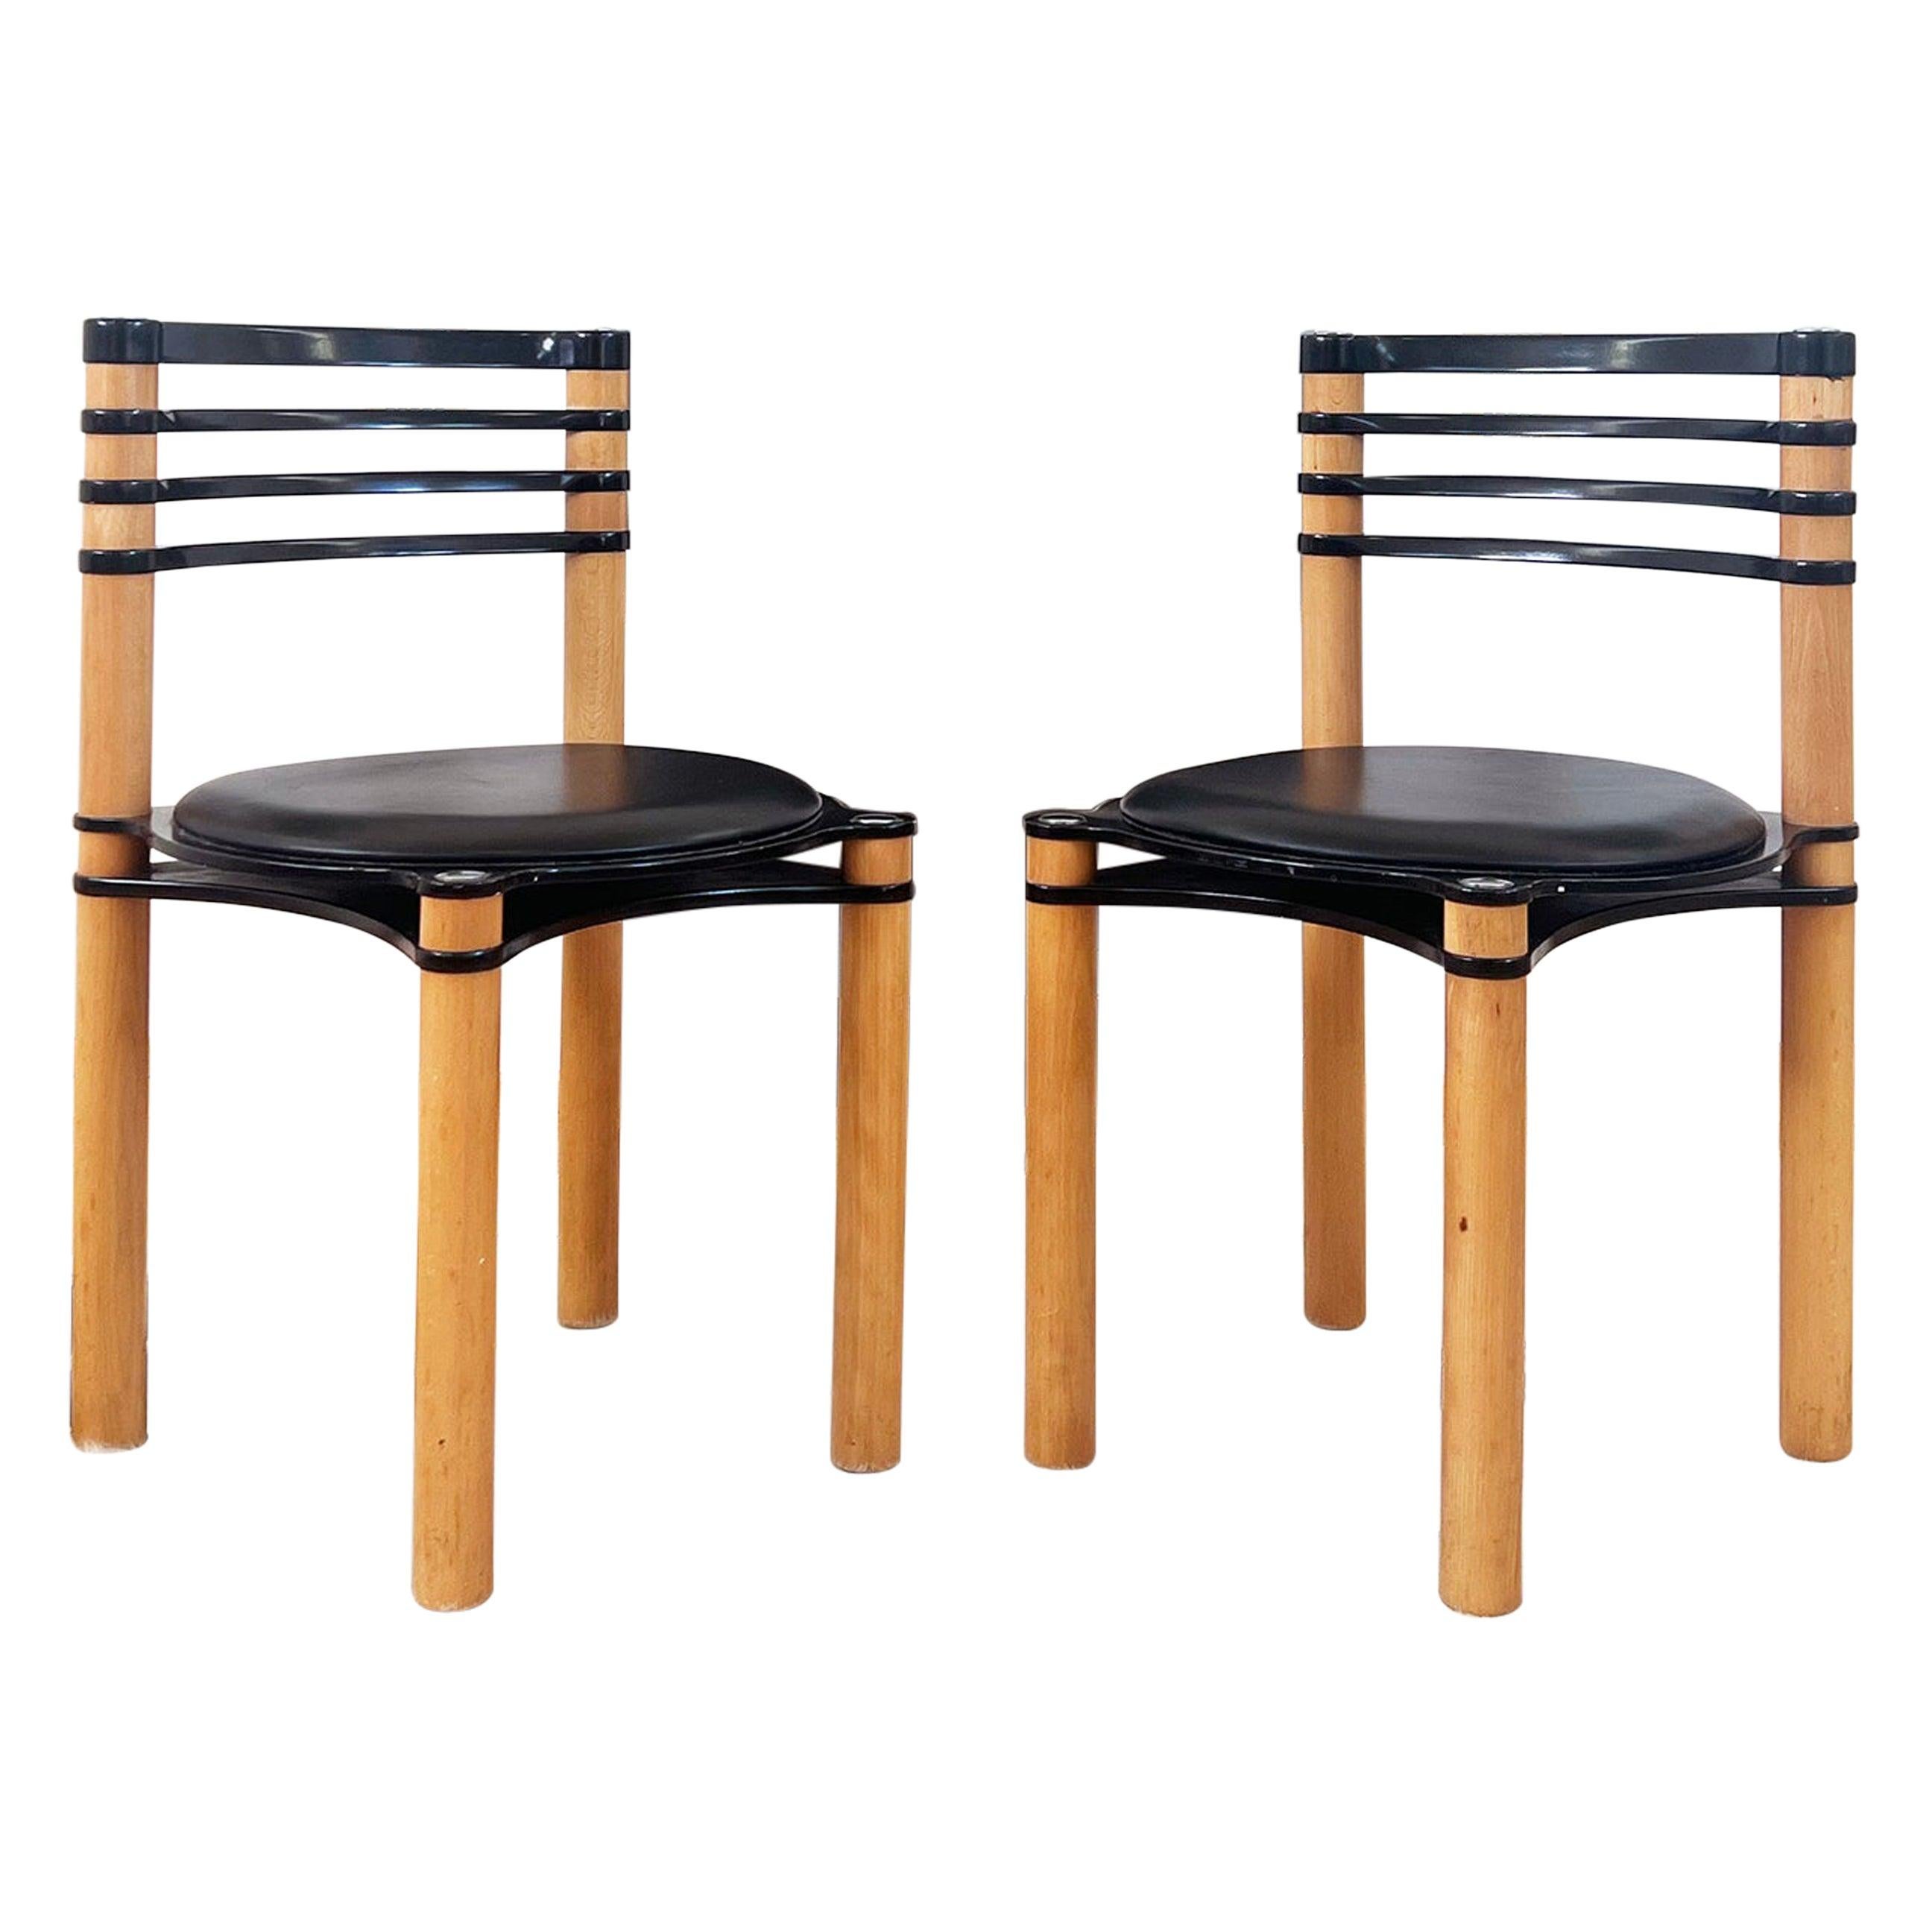 Late 20th Century Set of 4 Postmodern Black and Wood Chairs by Kurt Thut for Dietiker, 1980s For Sale